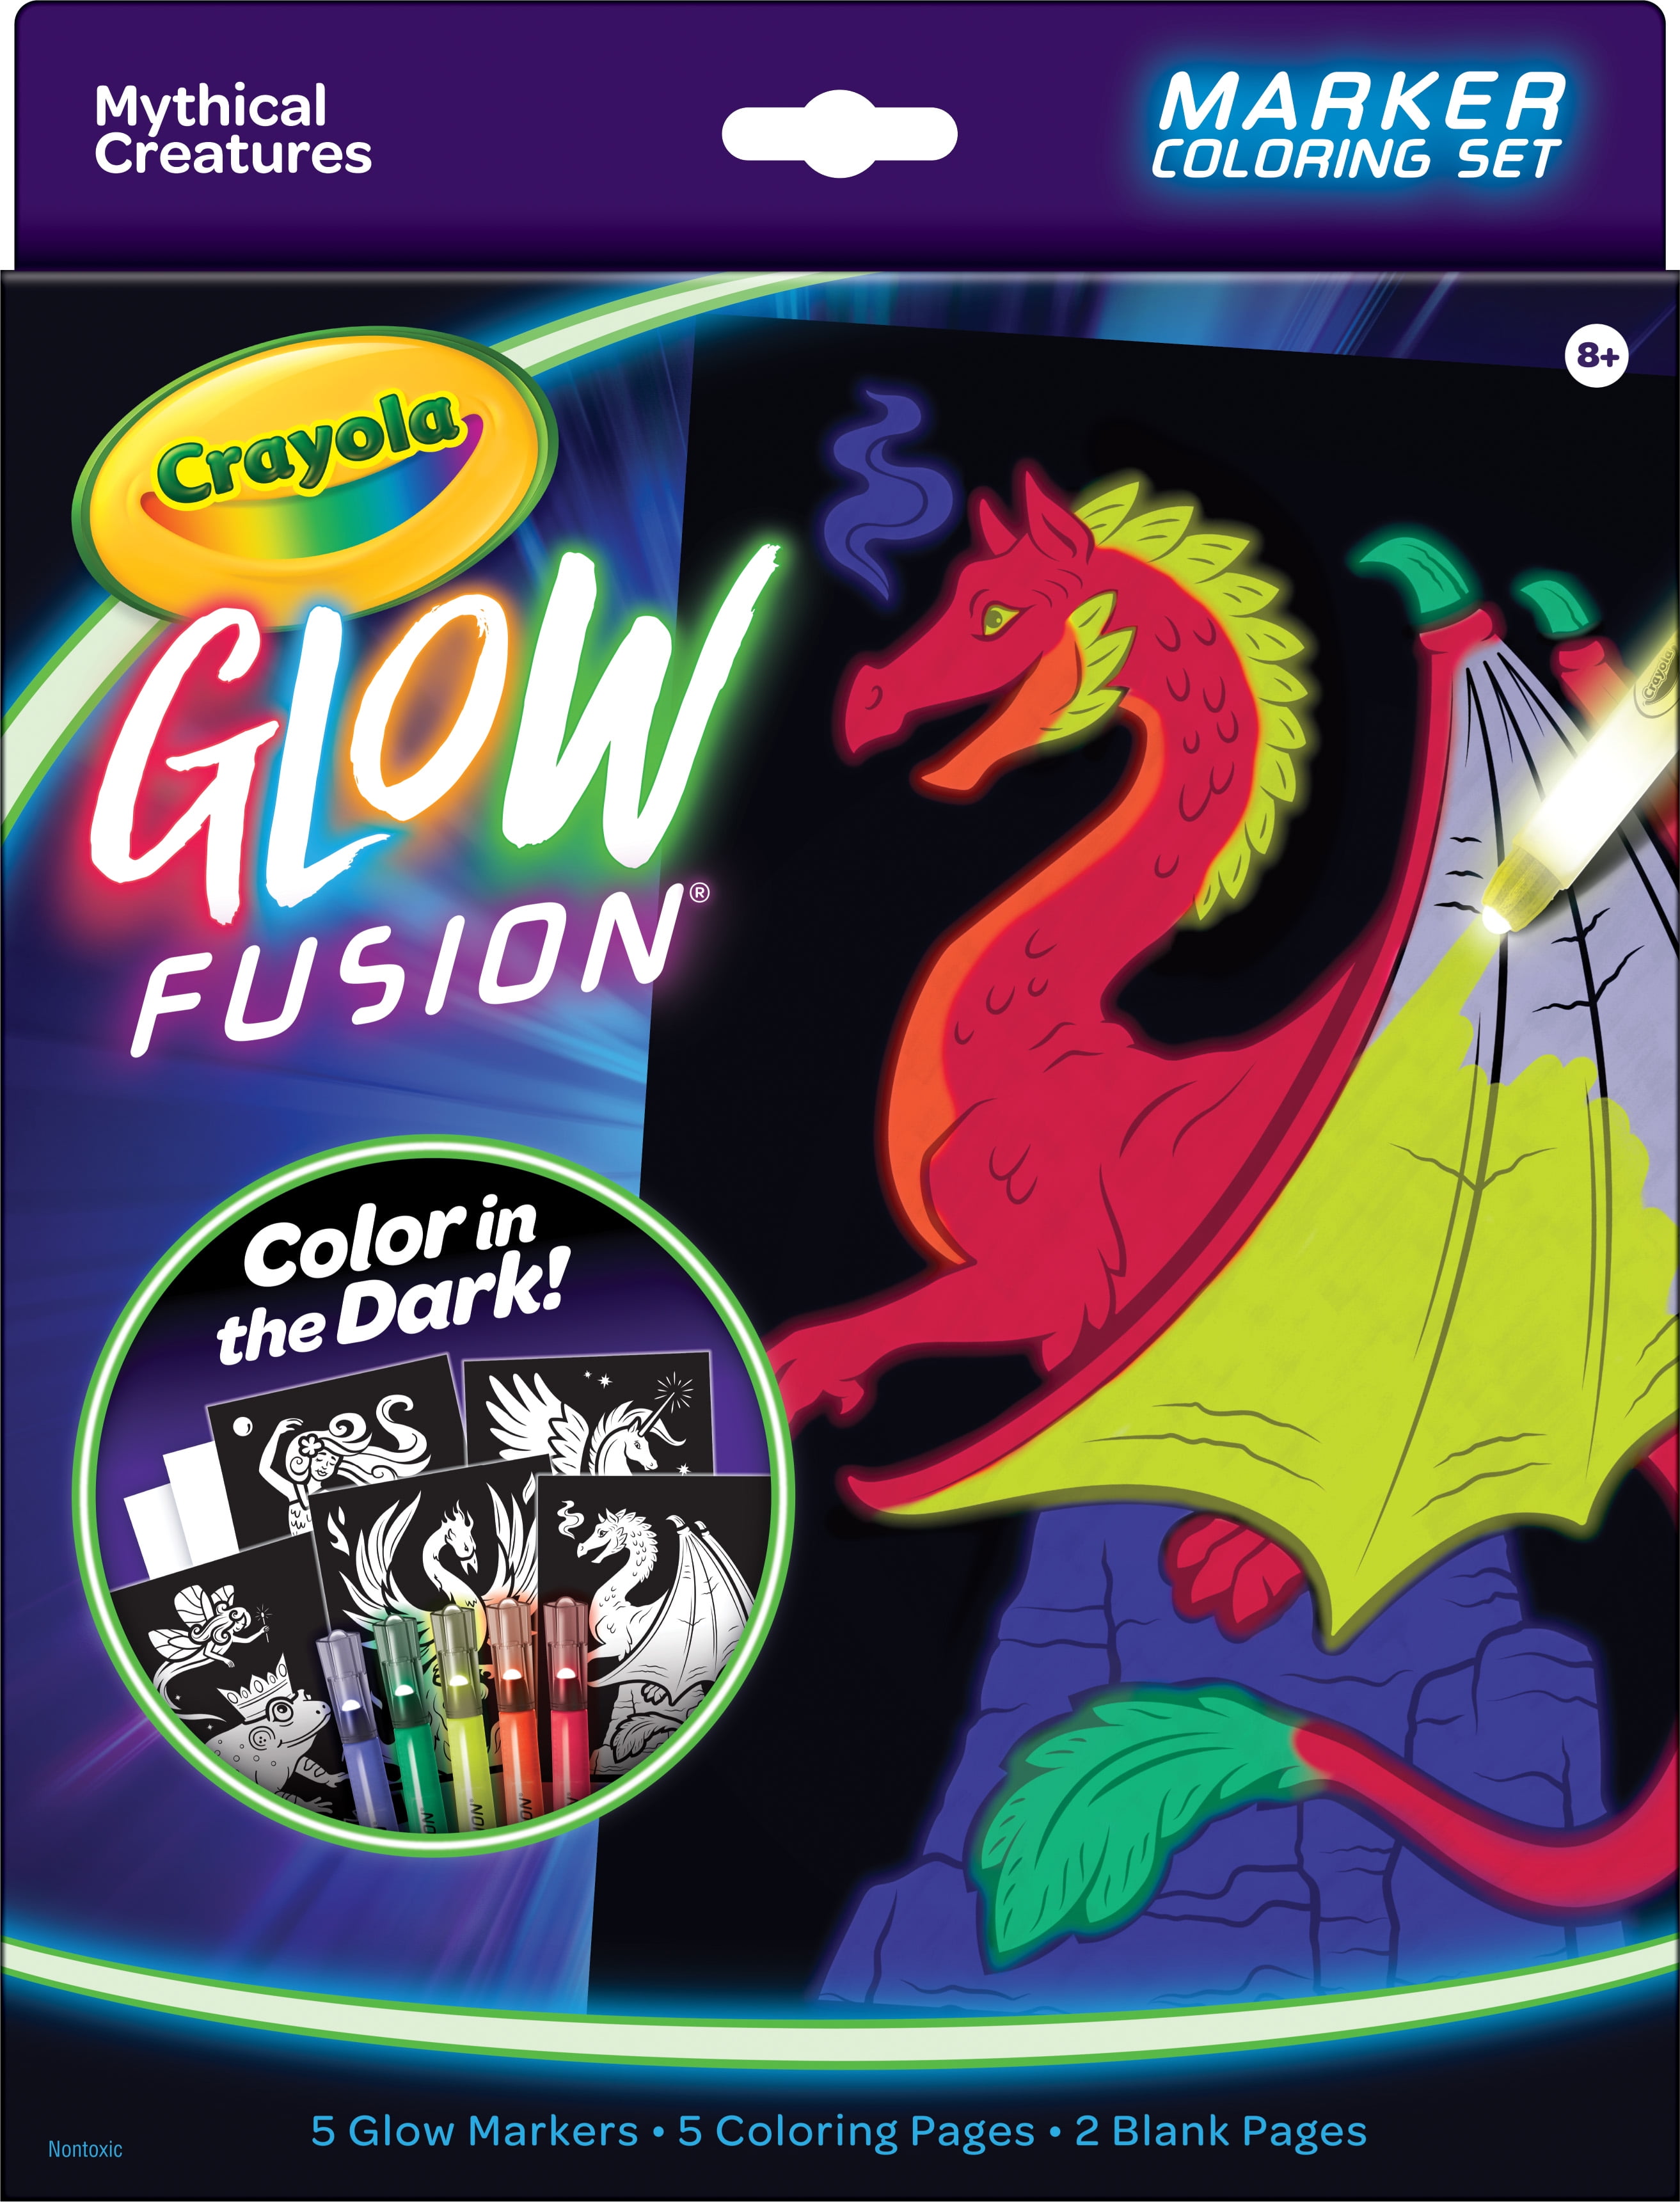 Crayola Glow in the Dark Coloring Set with Glow Markers, Mythical Creature, Gift for Kids, Unisex Child Ages 8+